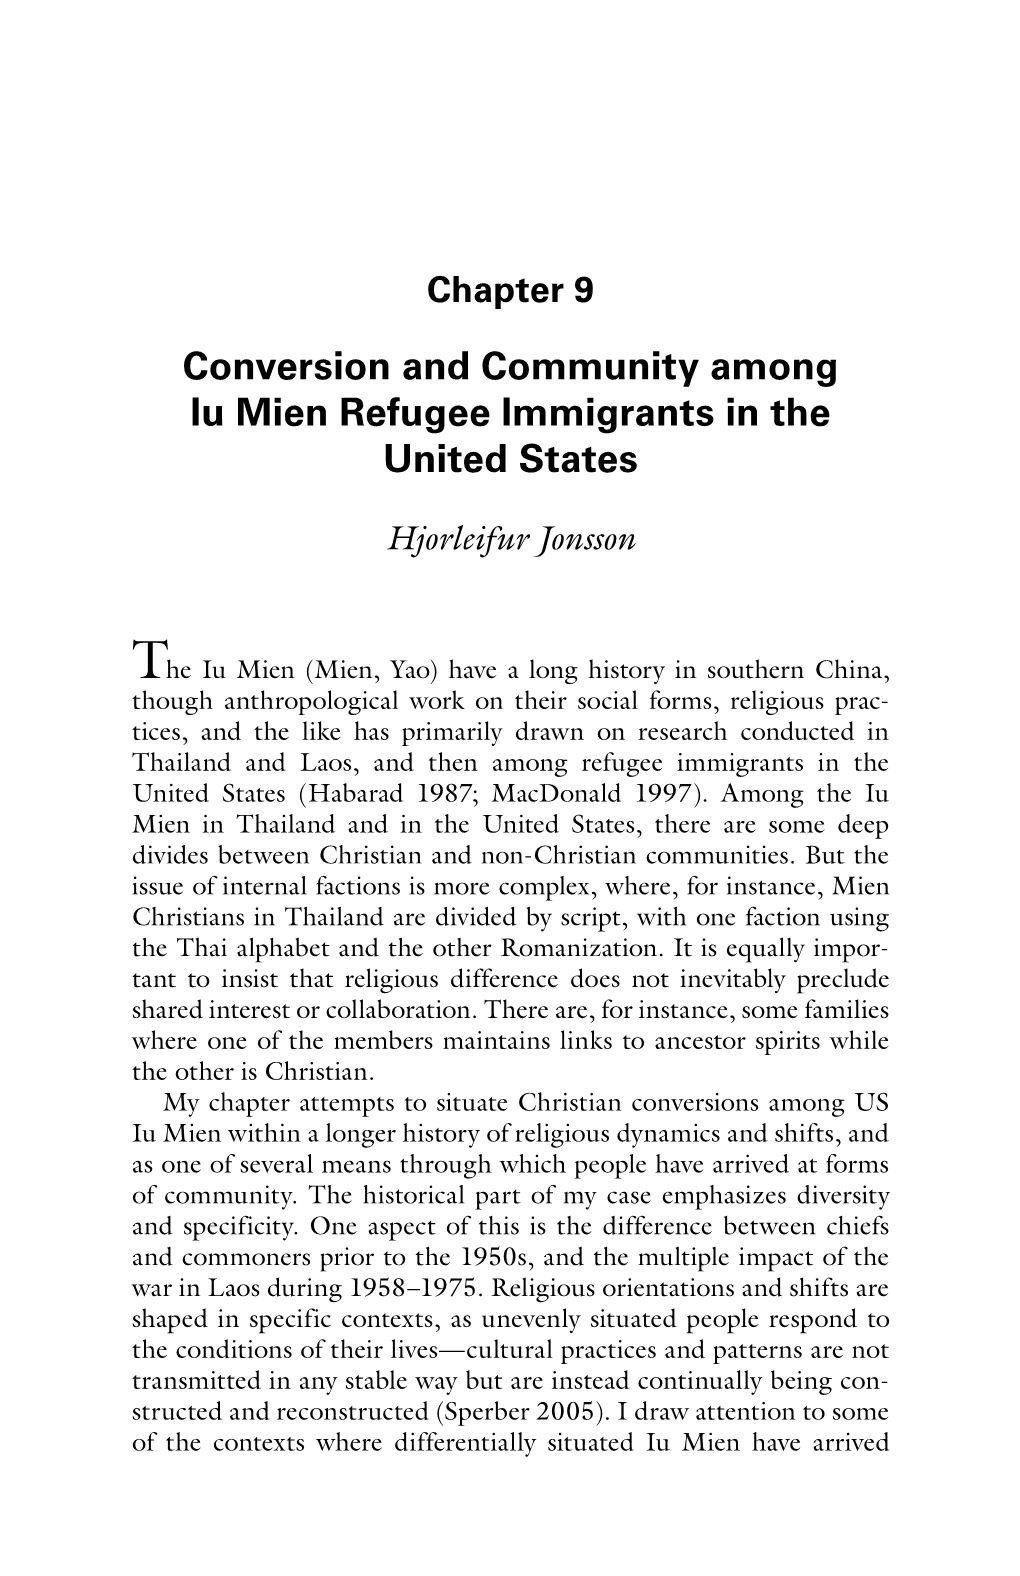 Conversion and Community Among Iu Mien Refugee Immigrants in the United States